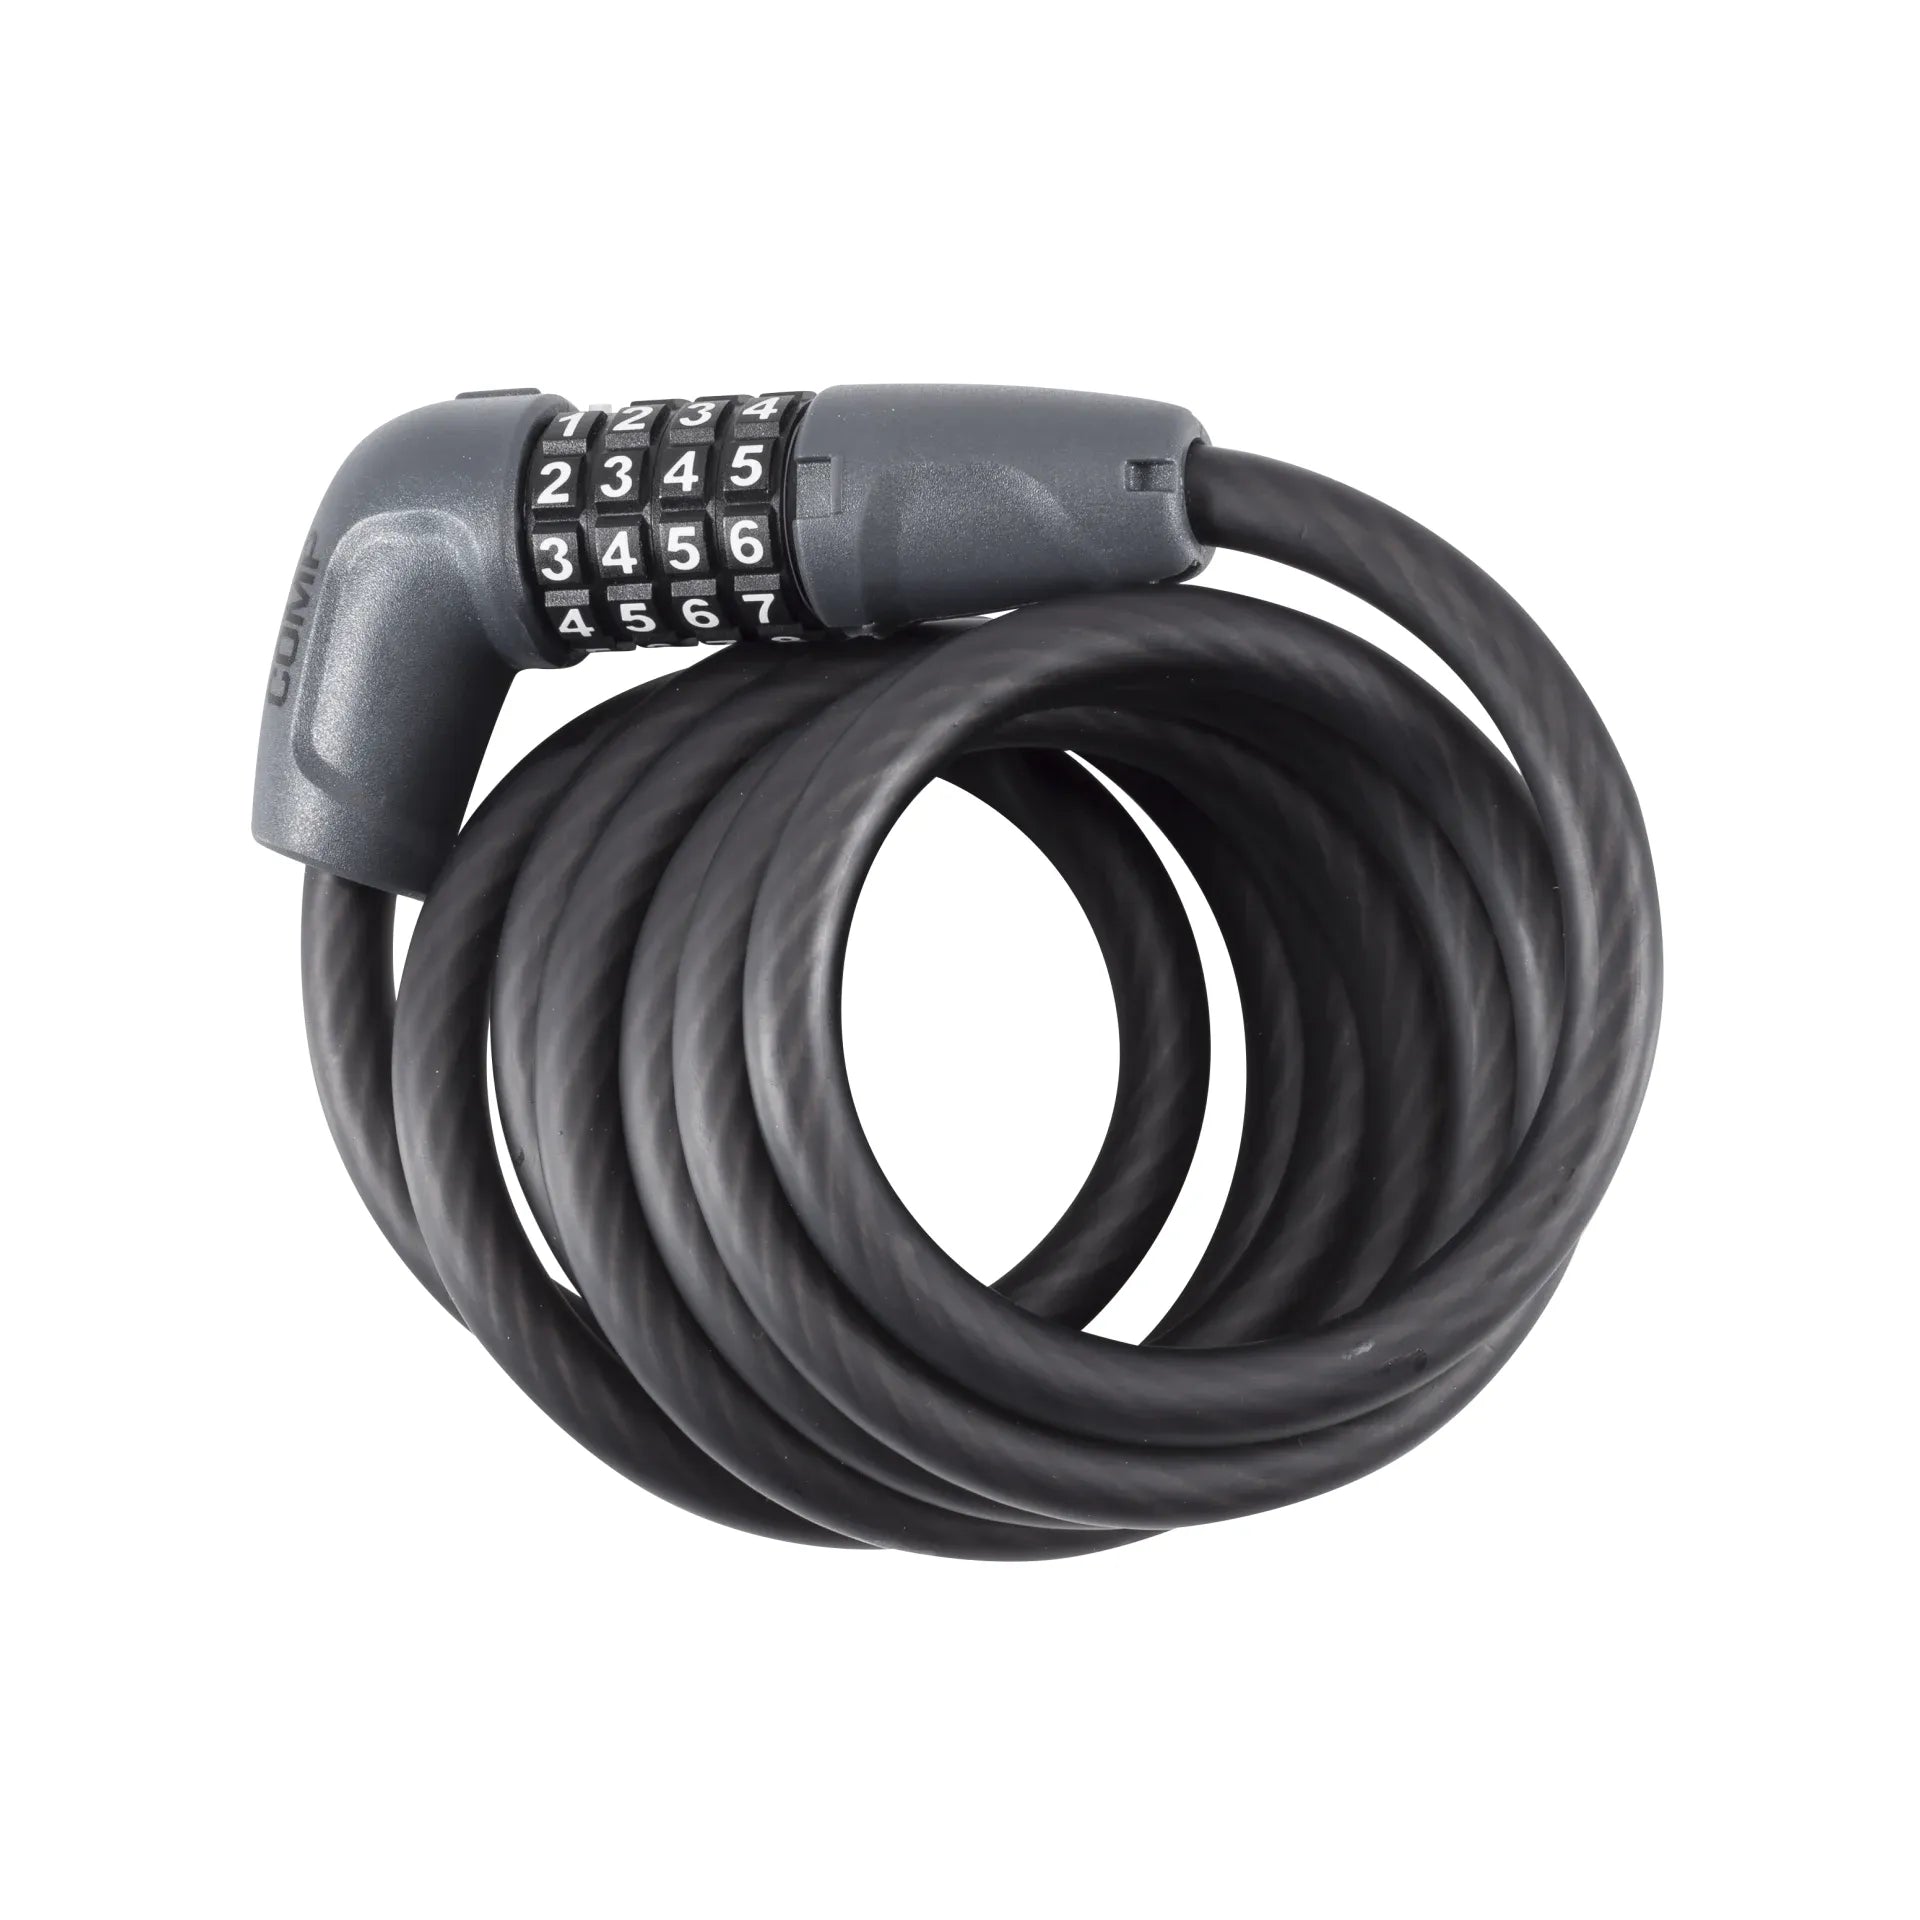 Bontrager Comp Combo Cable Lock